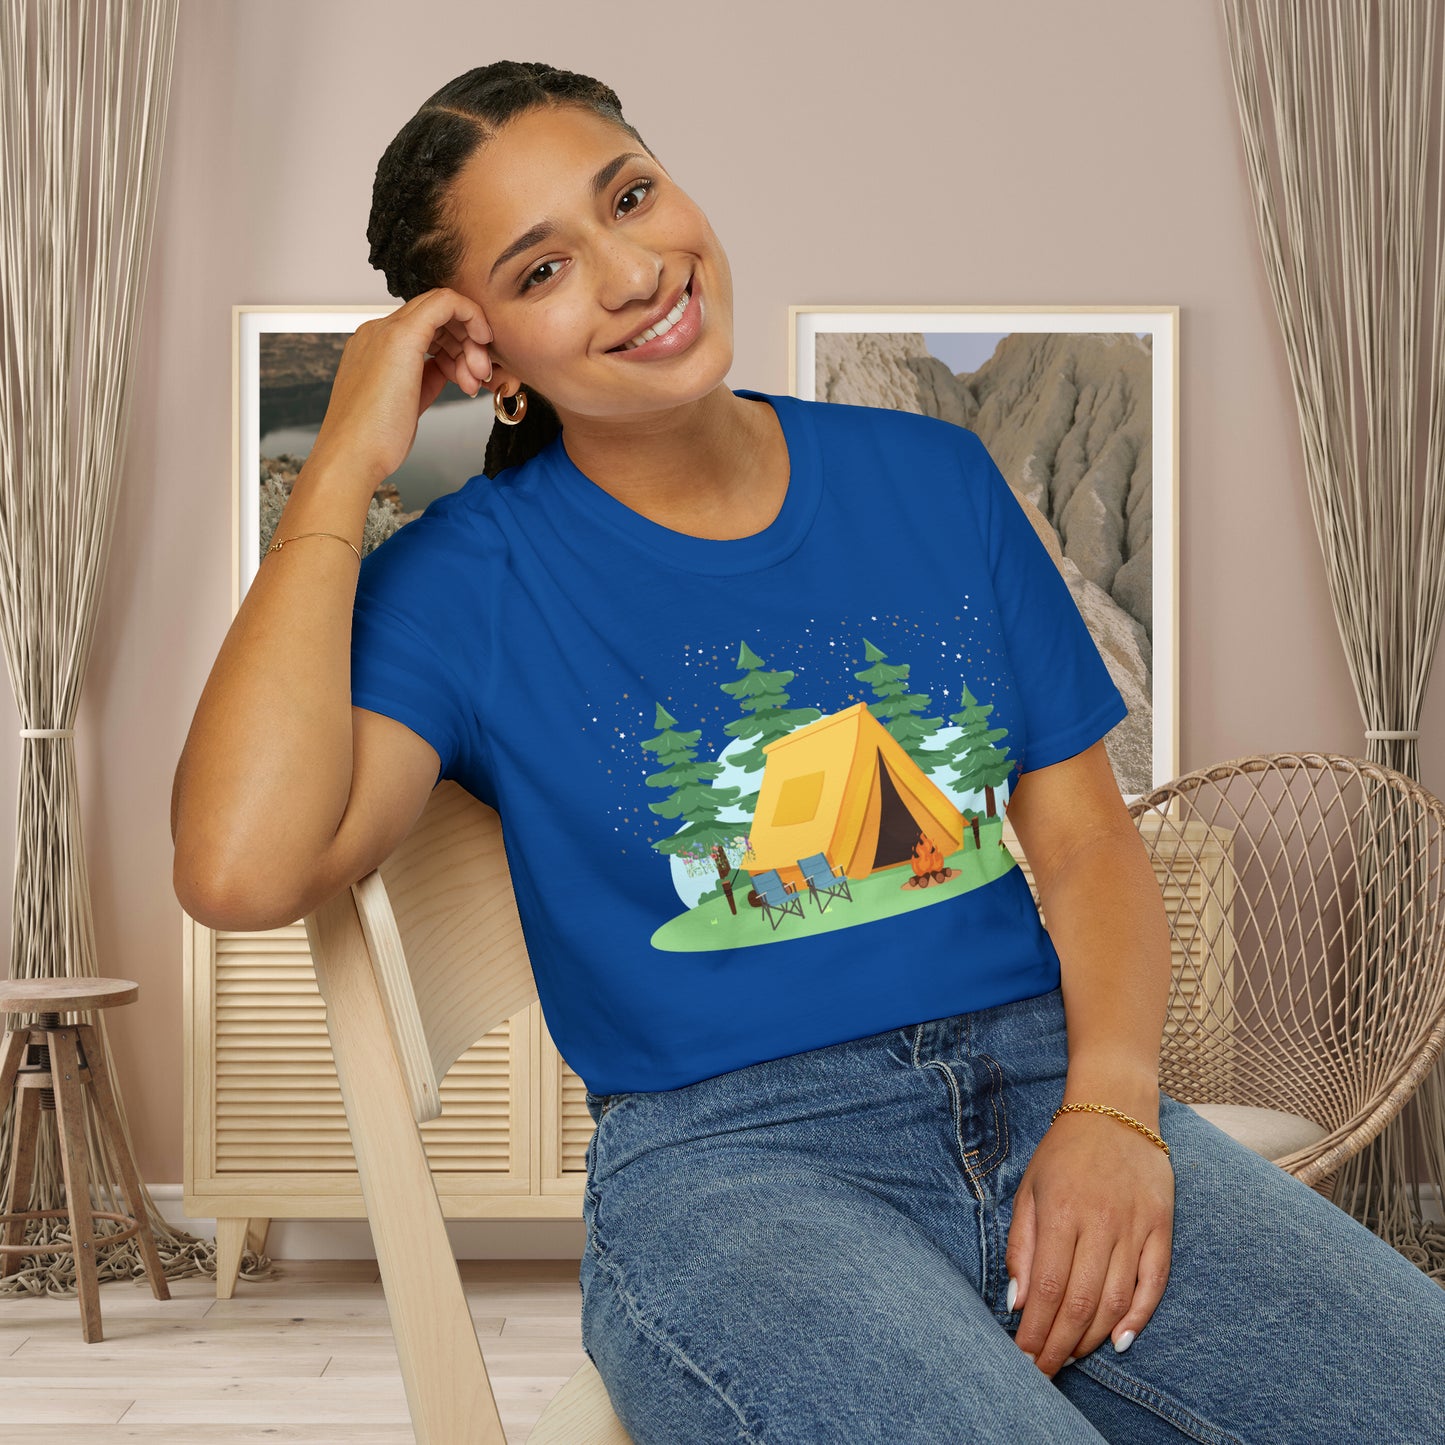 Camping can be so much fun! A happy place for many of us. Love of the great outdoors inspired design on this Unisex Softstyle T-Shirt.